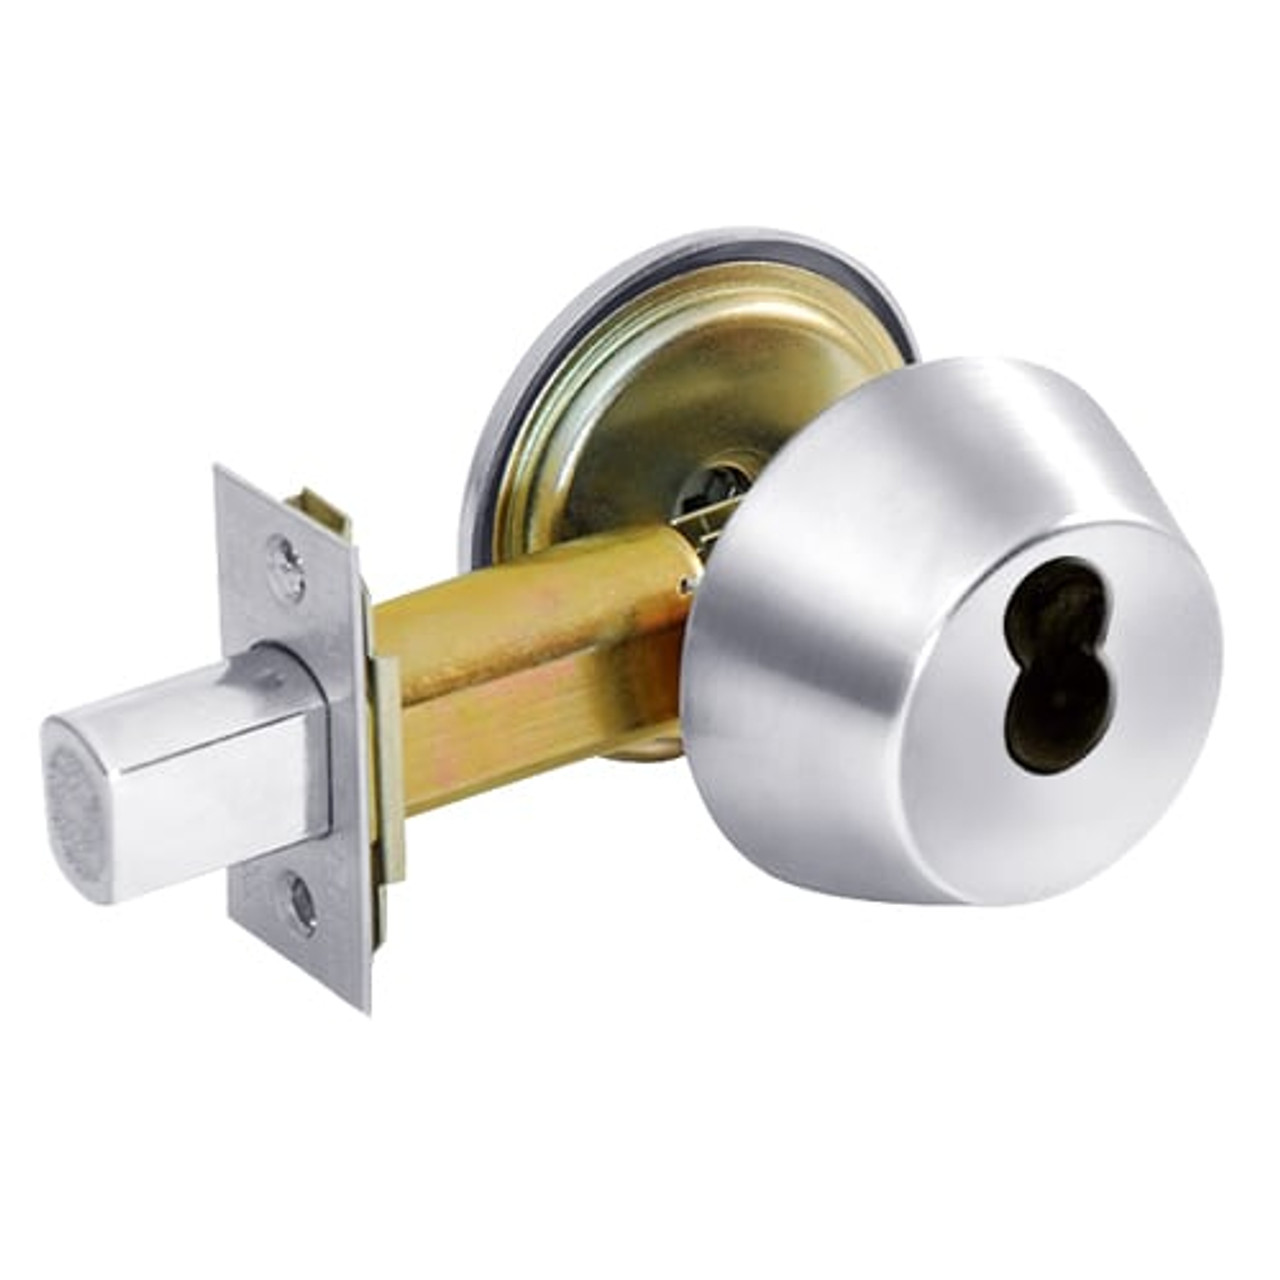 DL2217-625-CL6 Corbin DL2200 Series Classroom Cylindrical Deadlocks with Single Cylinder in Bright Chrome Finish